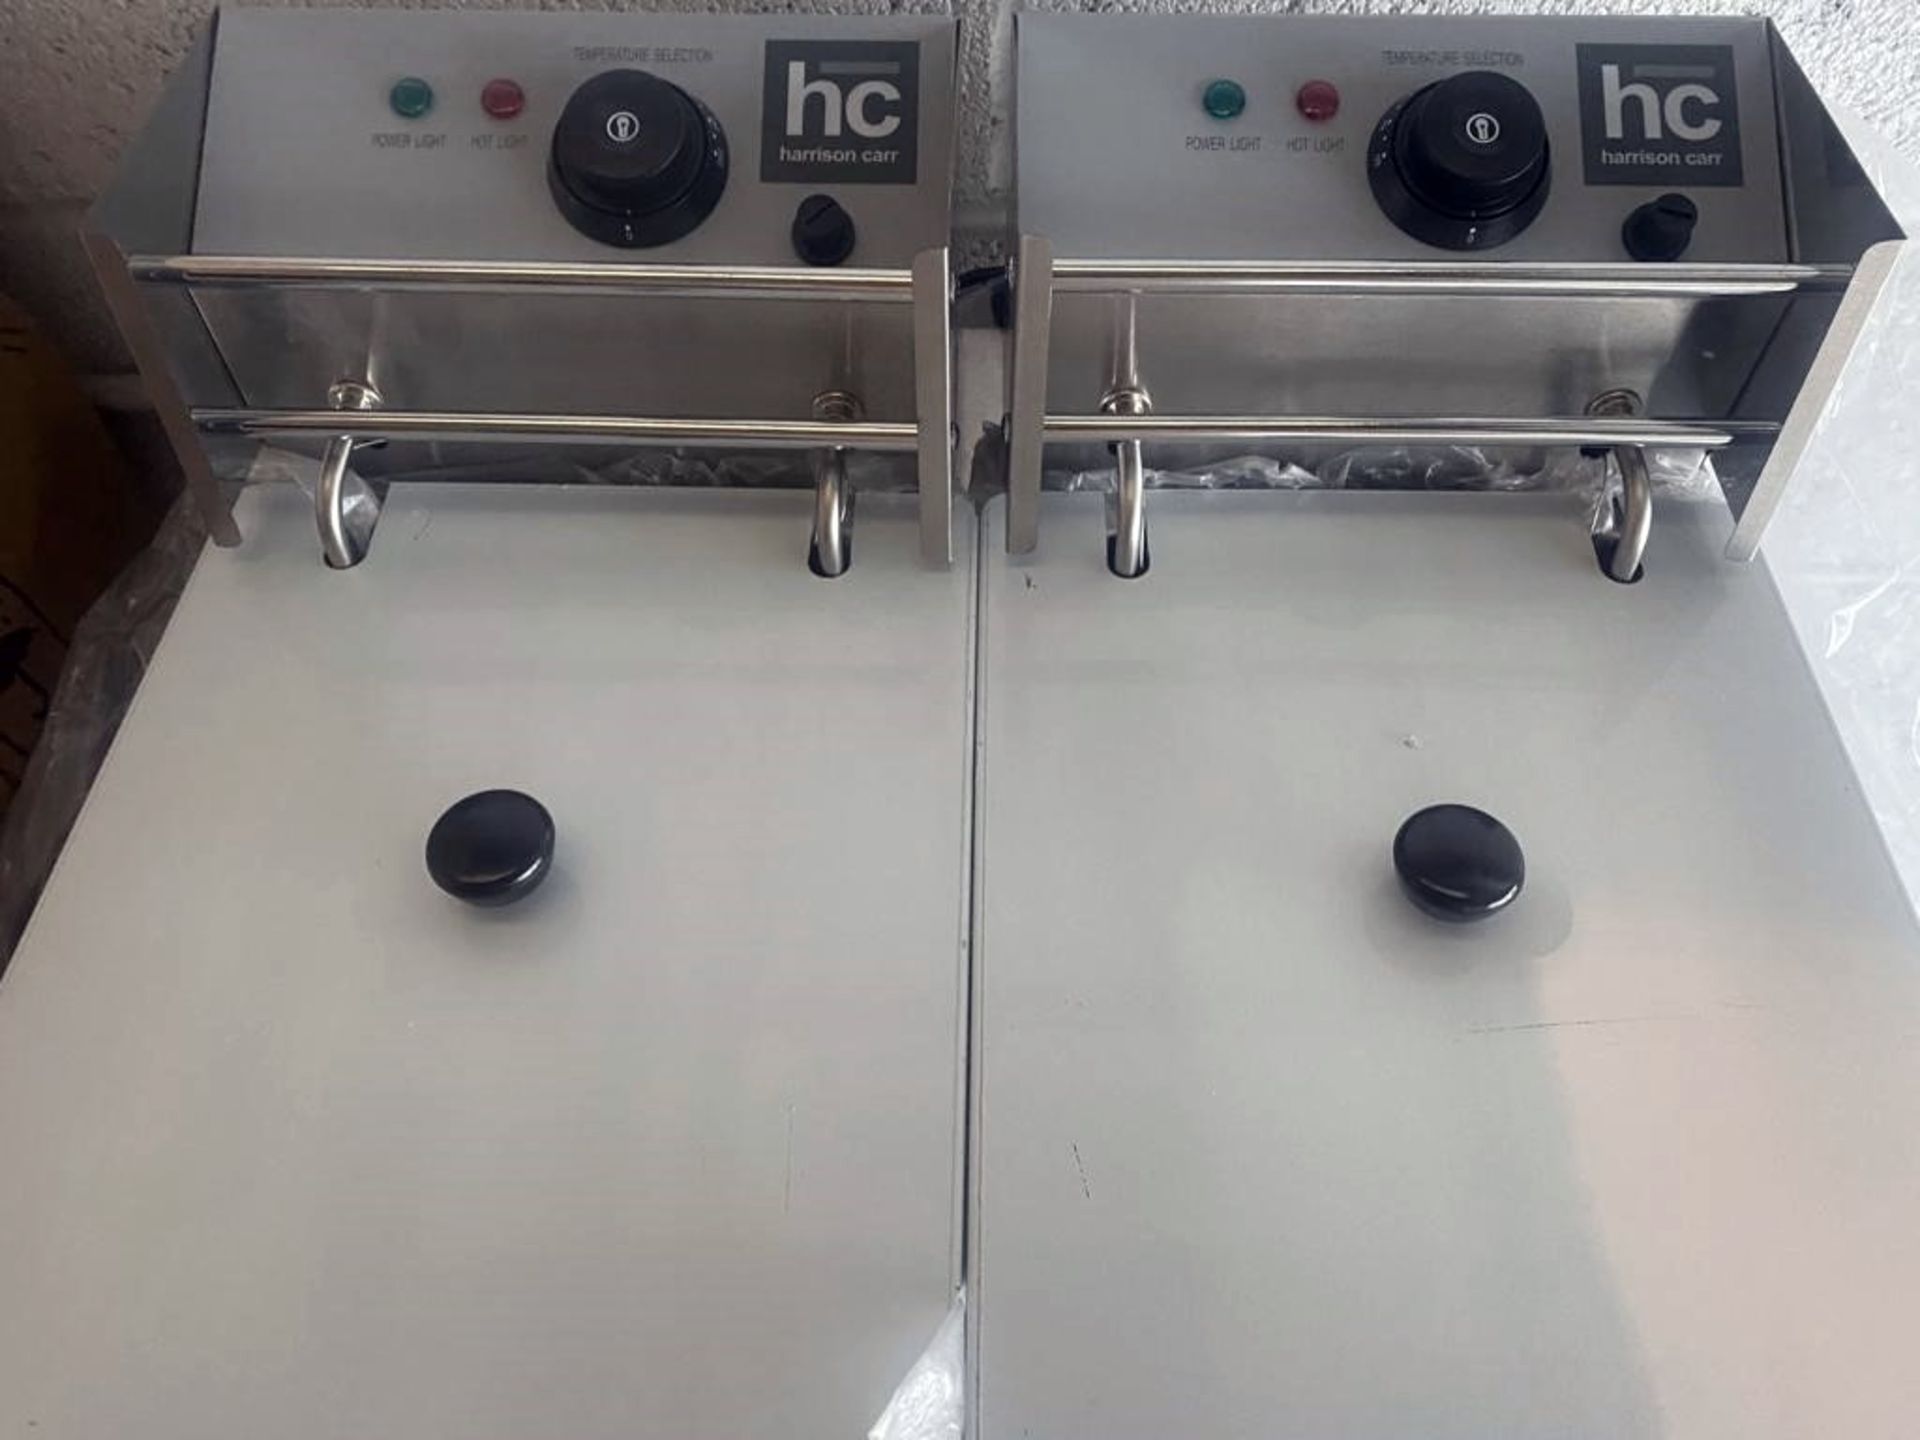 1 x HARRISON CARR Twin 2-Basket Countertop Electric Chips Fryer (HC-82) - 240v Single Phase - - Image 2 of 3